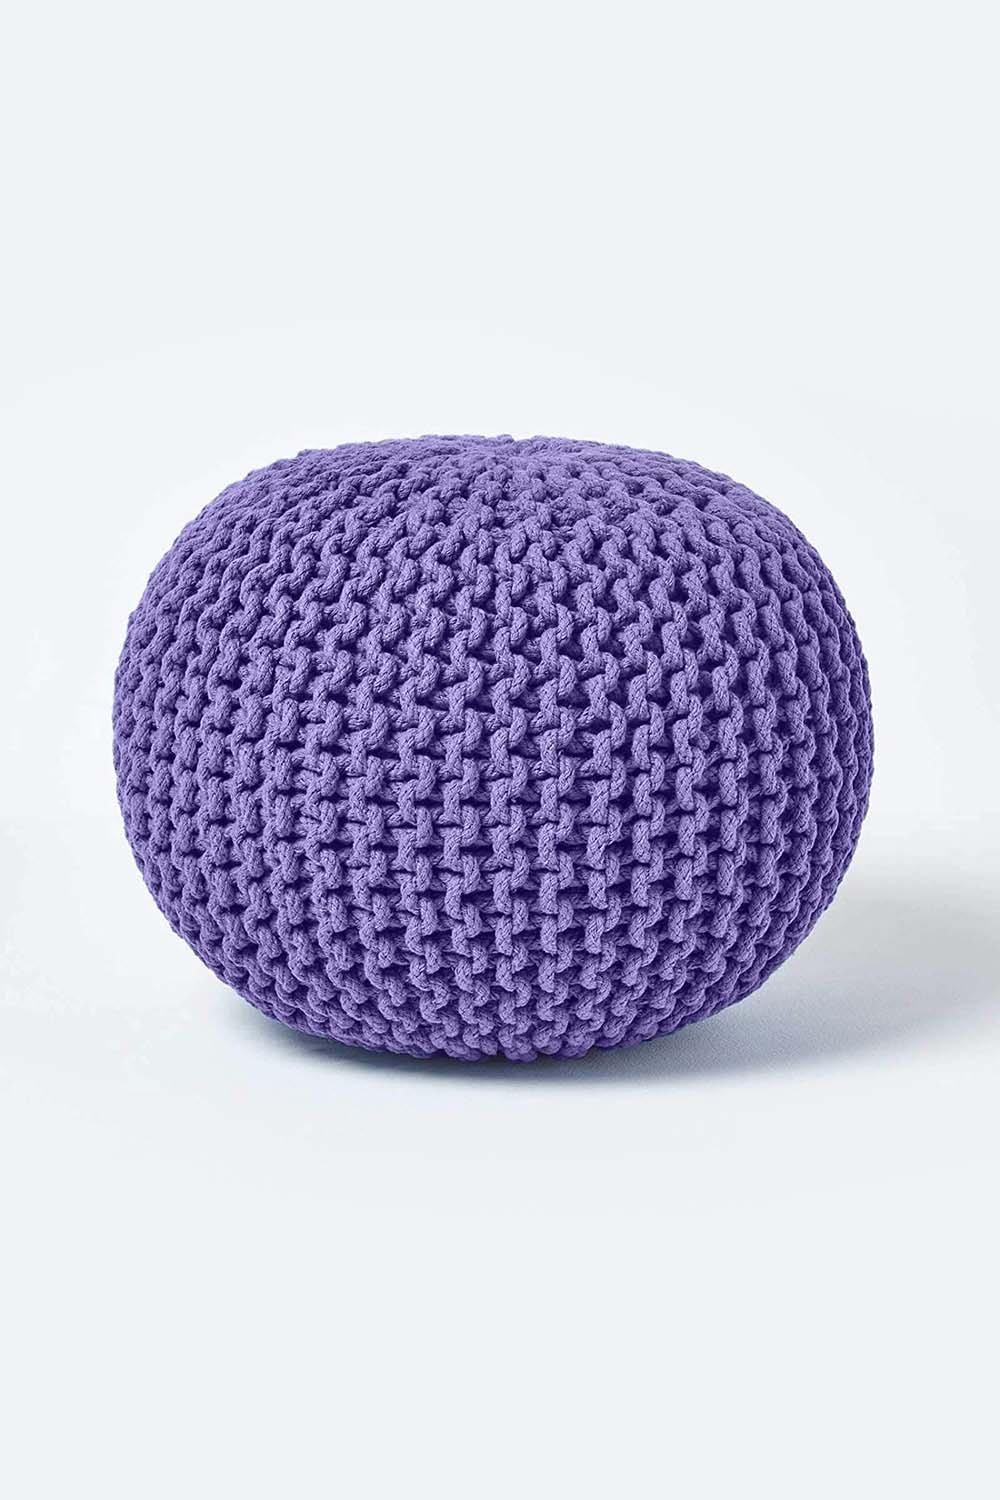 Homescapes Round Cotton Knitted Pouffe Footstool|purple